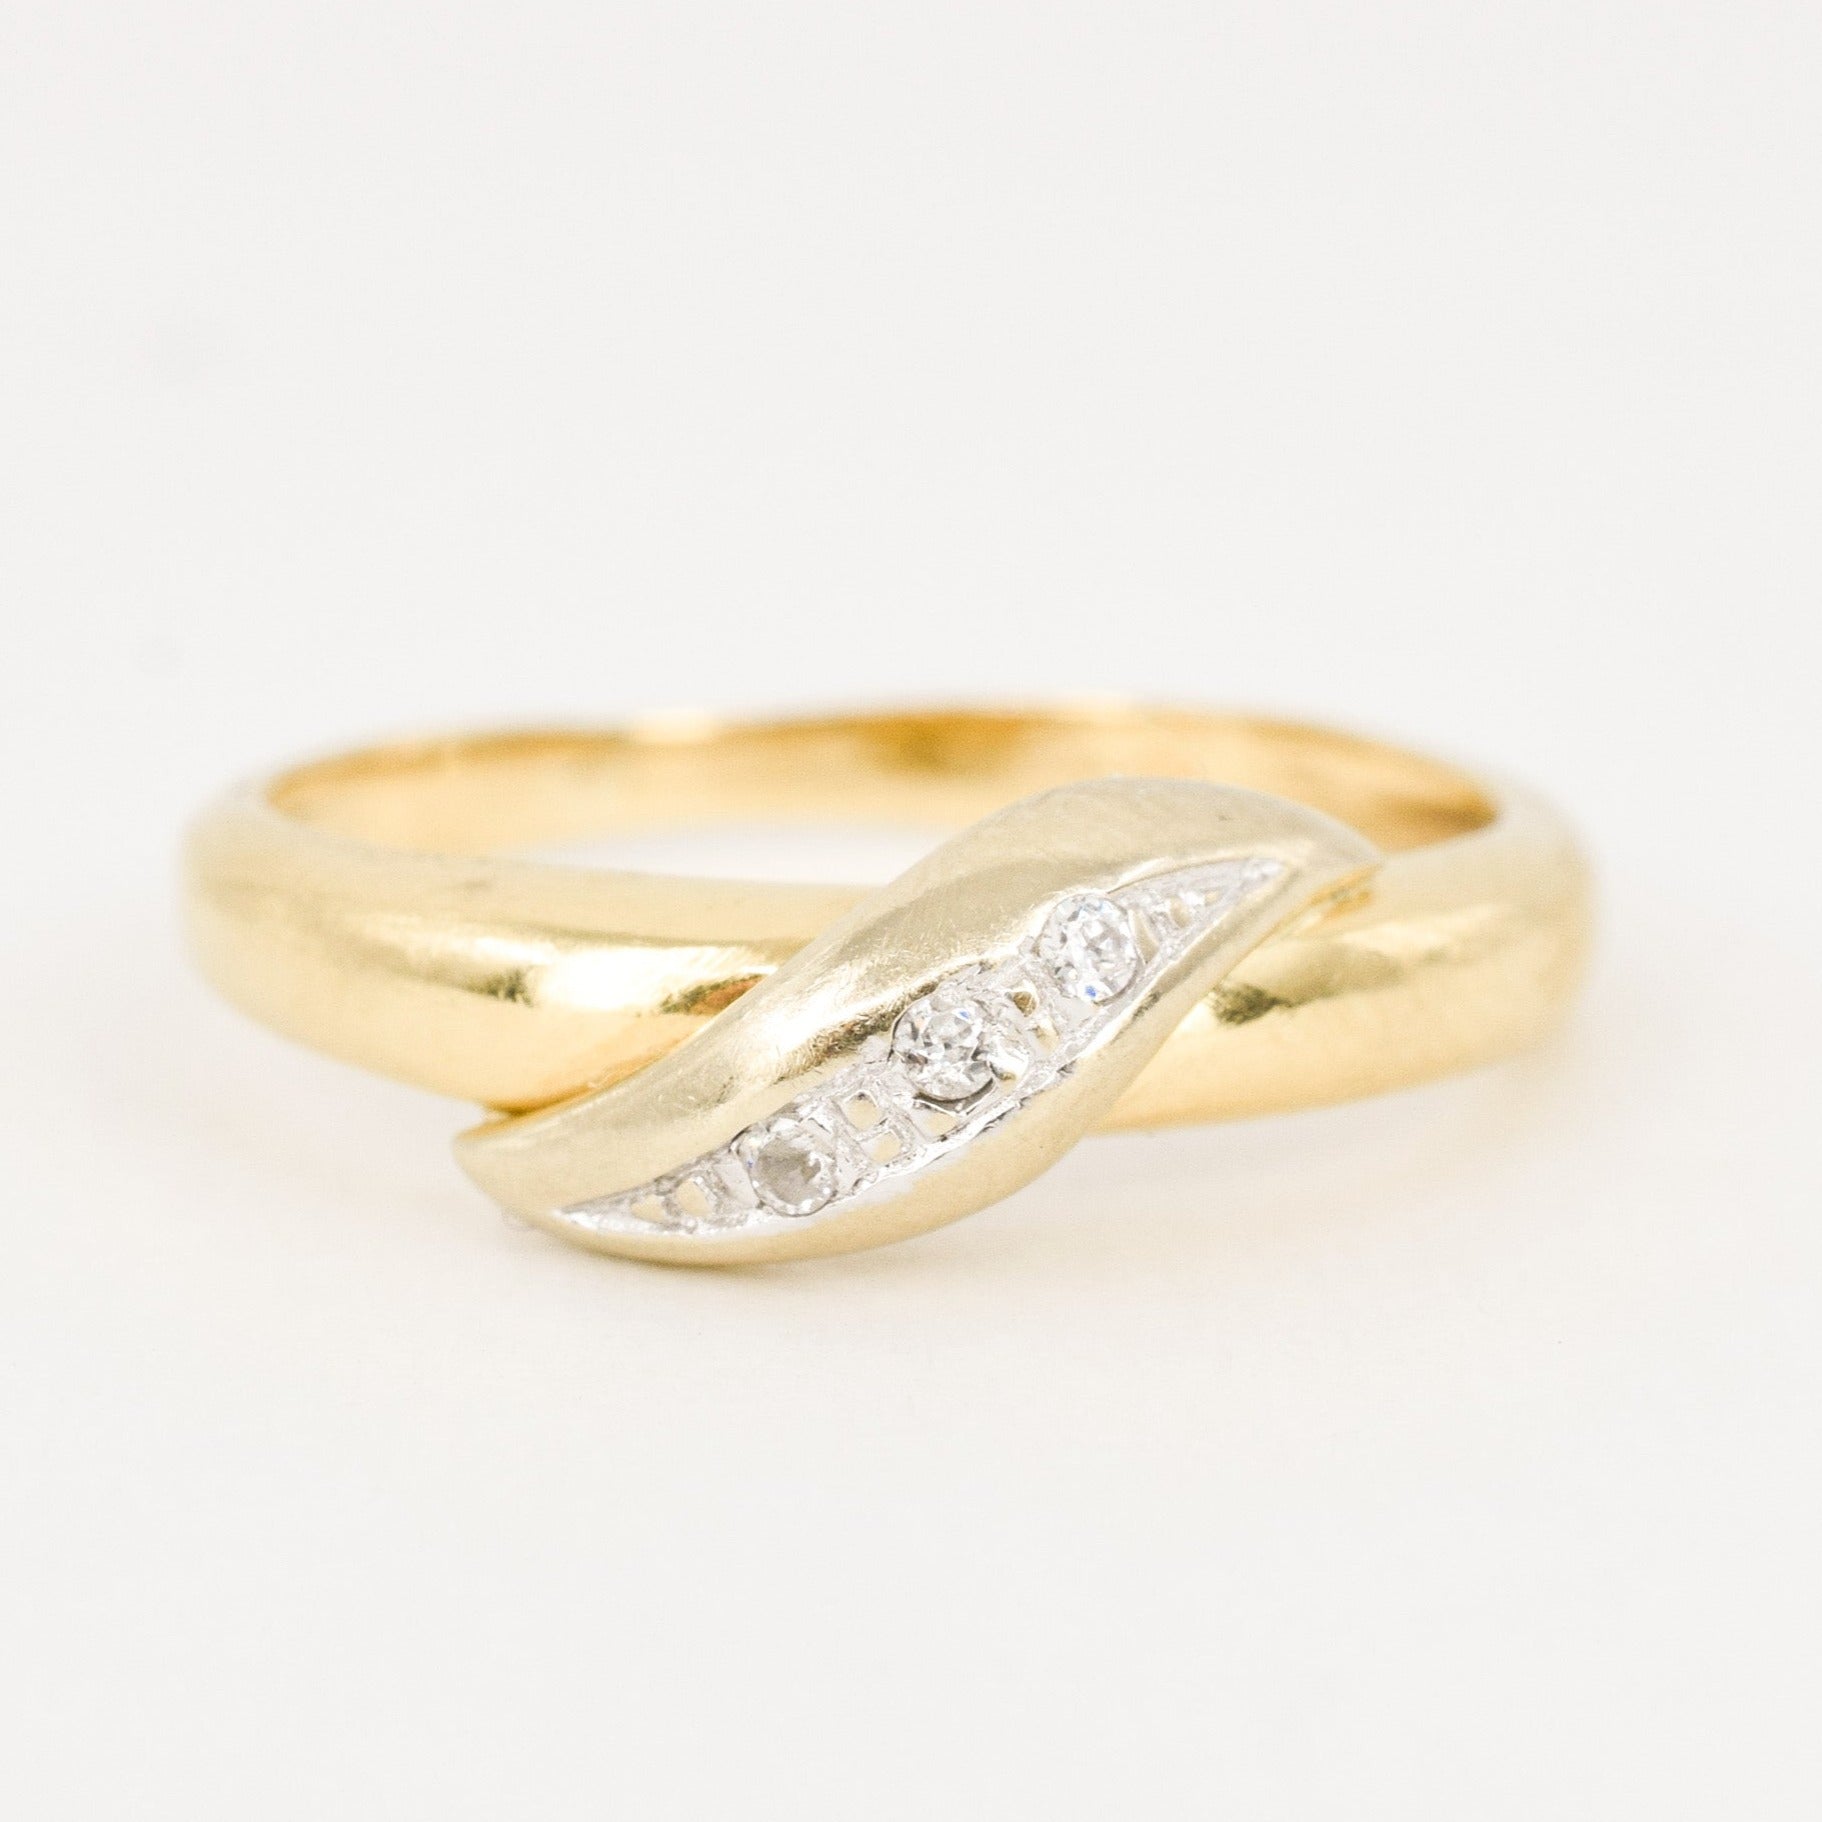 vintage gold stacking ring with diamond detail, folklor vintage jewelry canada